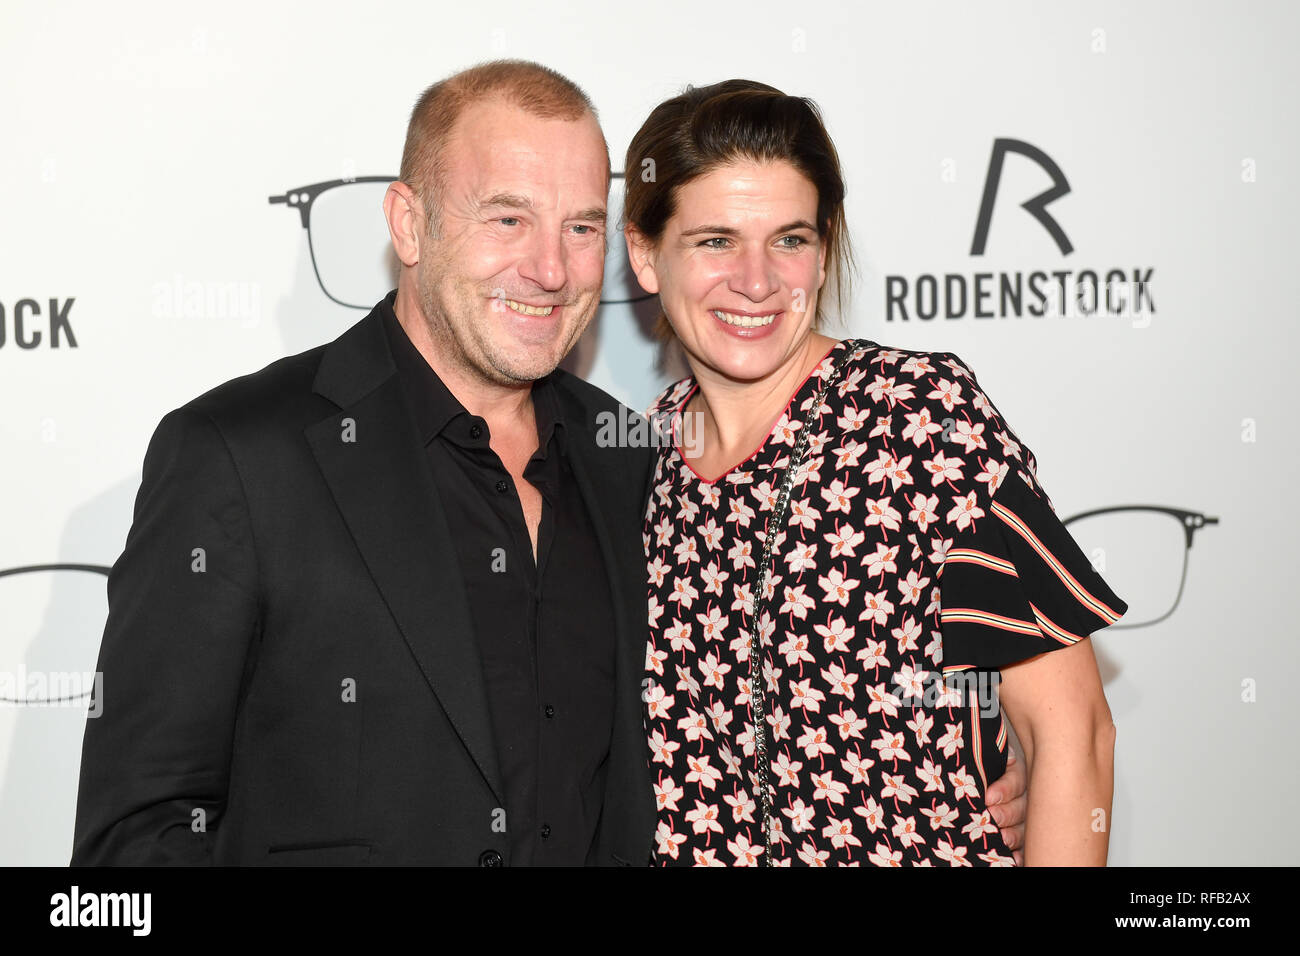 24 January 2019, Bavaria, München: Heino Ferch, actor and his wife Marie-Jeanette Ferch come to the Rodenstock Eyewear Show 2019 in the Isarforum. Photo: Tobias Hase/tha/dpa Stock Photo